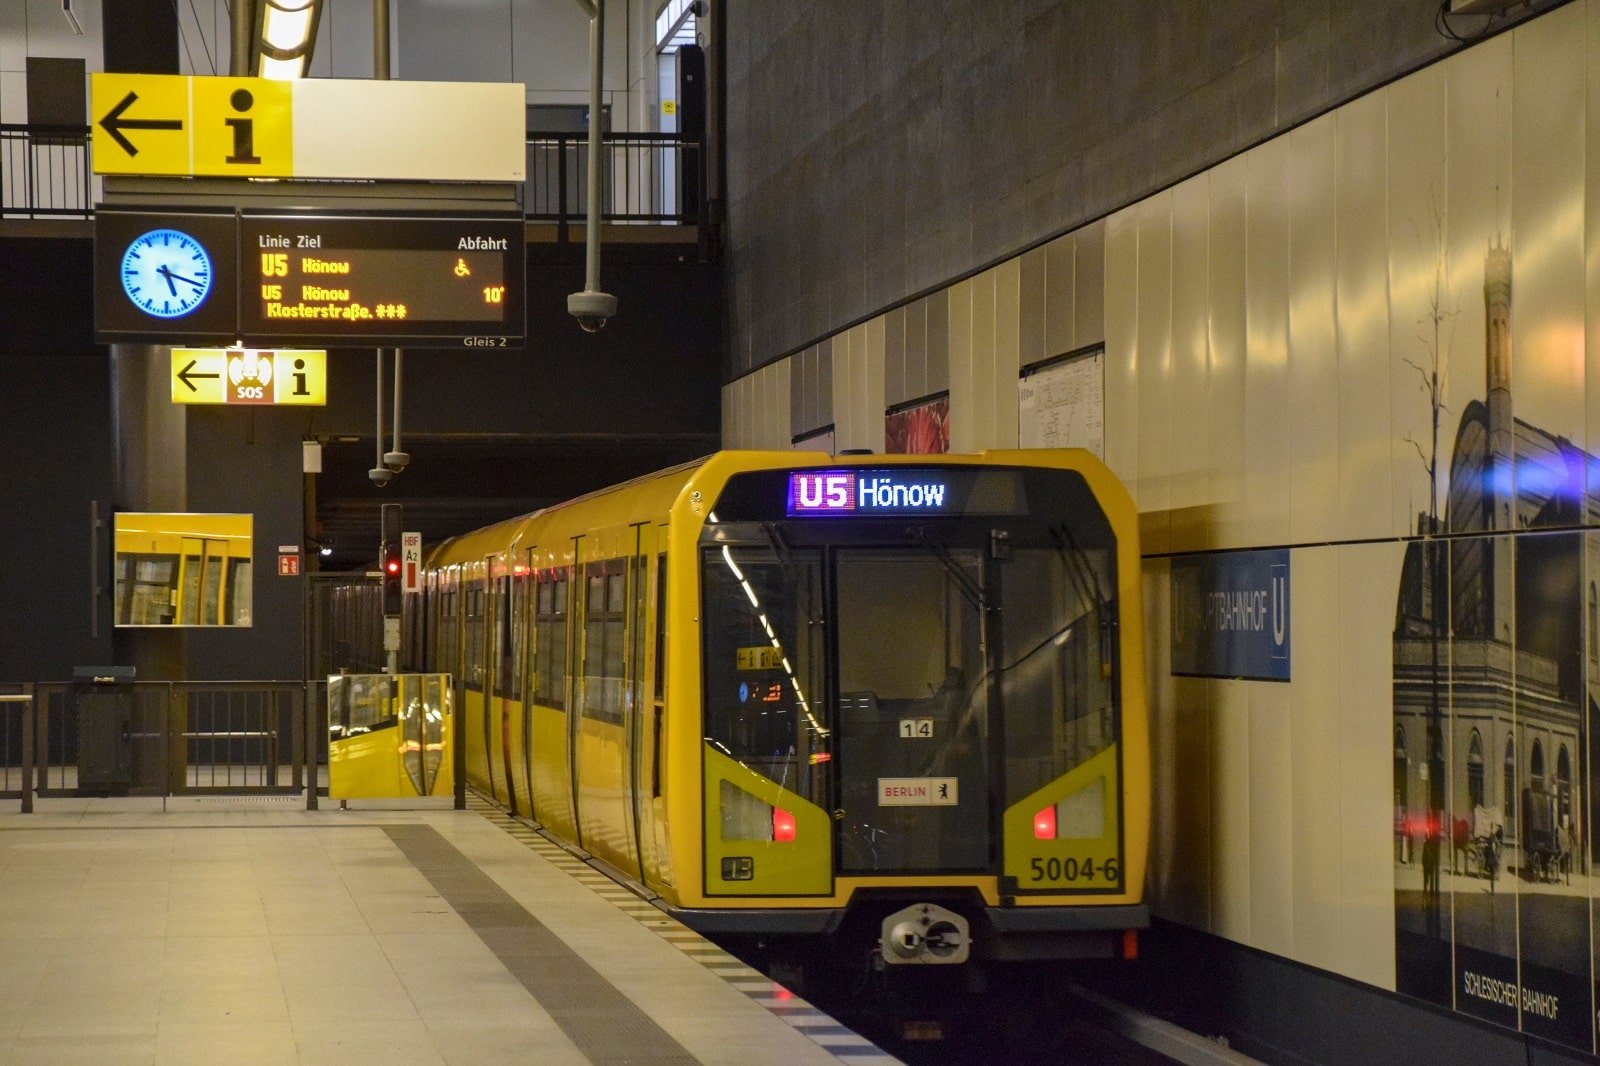 <p><span>Berlin’s public transport consists of the U-Bahn (subway), S-Bahn (above-ground train), trams, and buses. The U-Bahn is ideal for city center travel, while the S-Bahn covers a wider area, including suburbs. </span></p> <p><b>Insider’s Tip: </b><span>Consider purchasing a Berlin WelcomeCard for unlimited travel and discounts on tourist attractions. </span></p> <p><b>When to Travel: </b><span>Midday and late evenings are less crowded times to travel. </span></p>